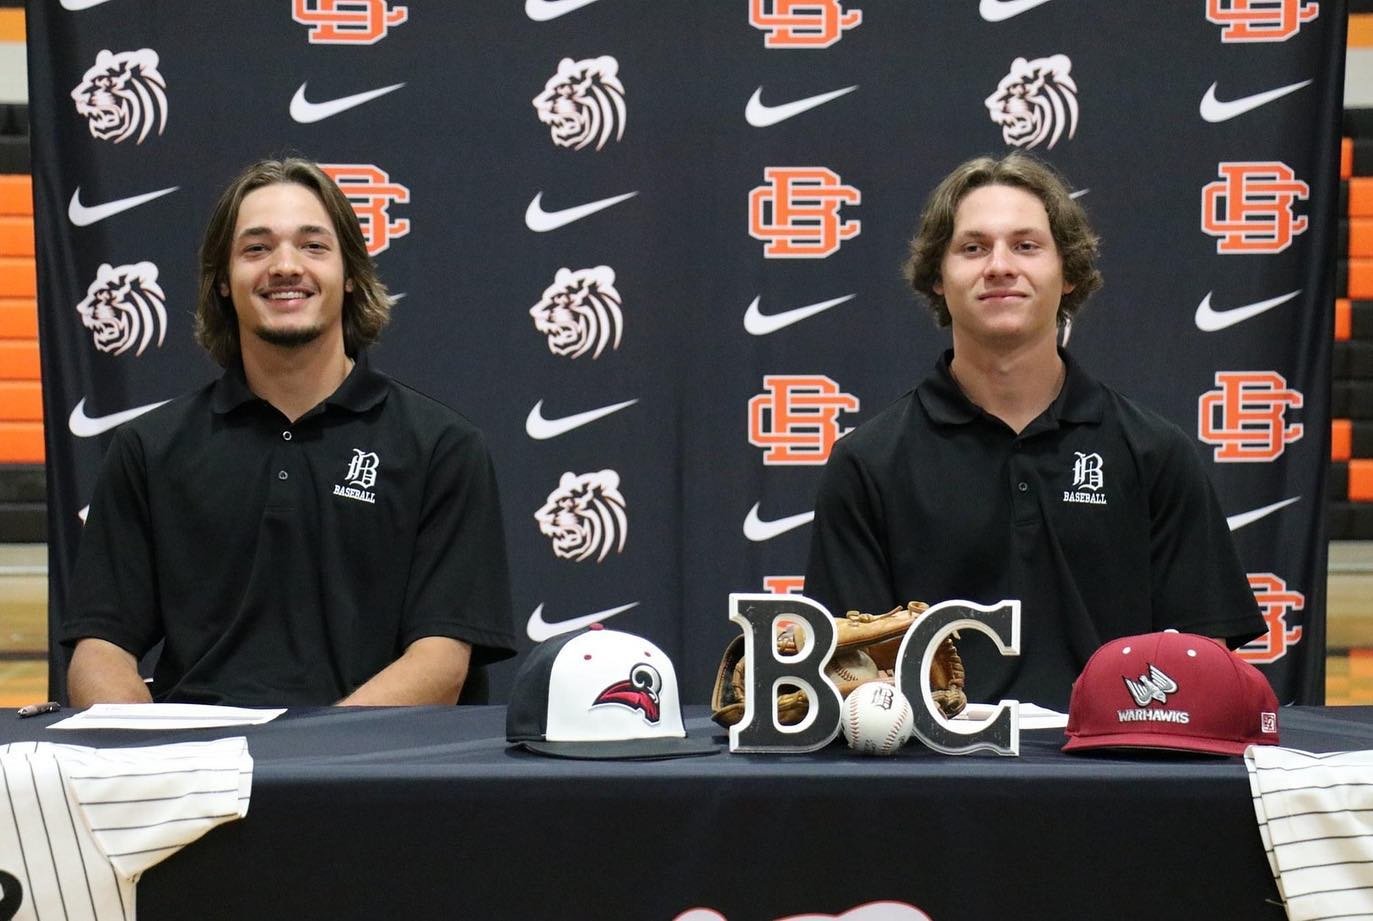 Reece Buck (University of Mobile) and Justin Brunson (Coastal Alabama-East) pose for a picture during an April 28 signing ceremony where the pair of Baldwin County Tigers solidified extending their baseball careers. The duo was among 29 local student-athletes recently named to all-academic teams by the Alabama Baseball Coaches Association.